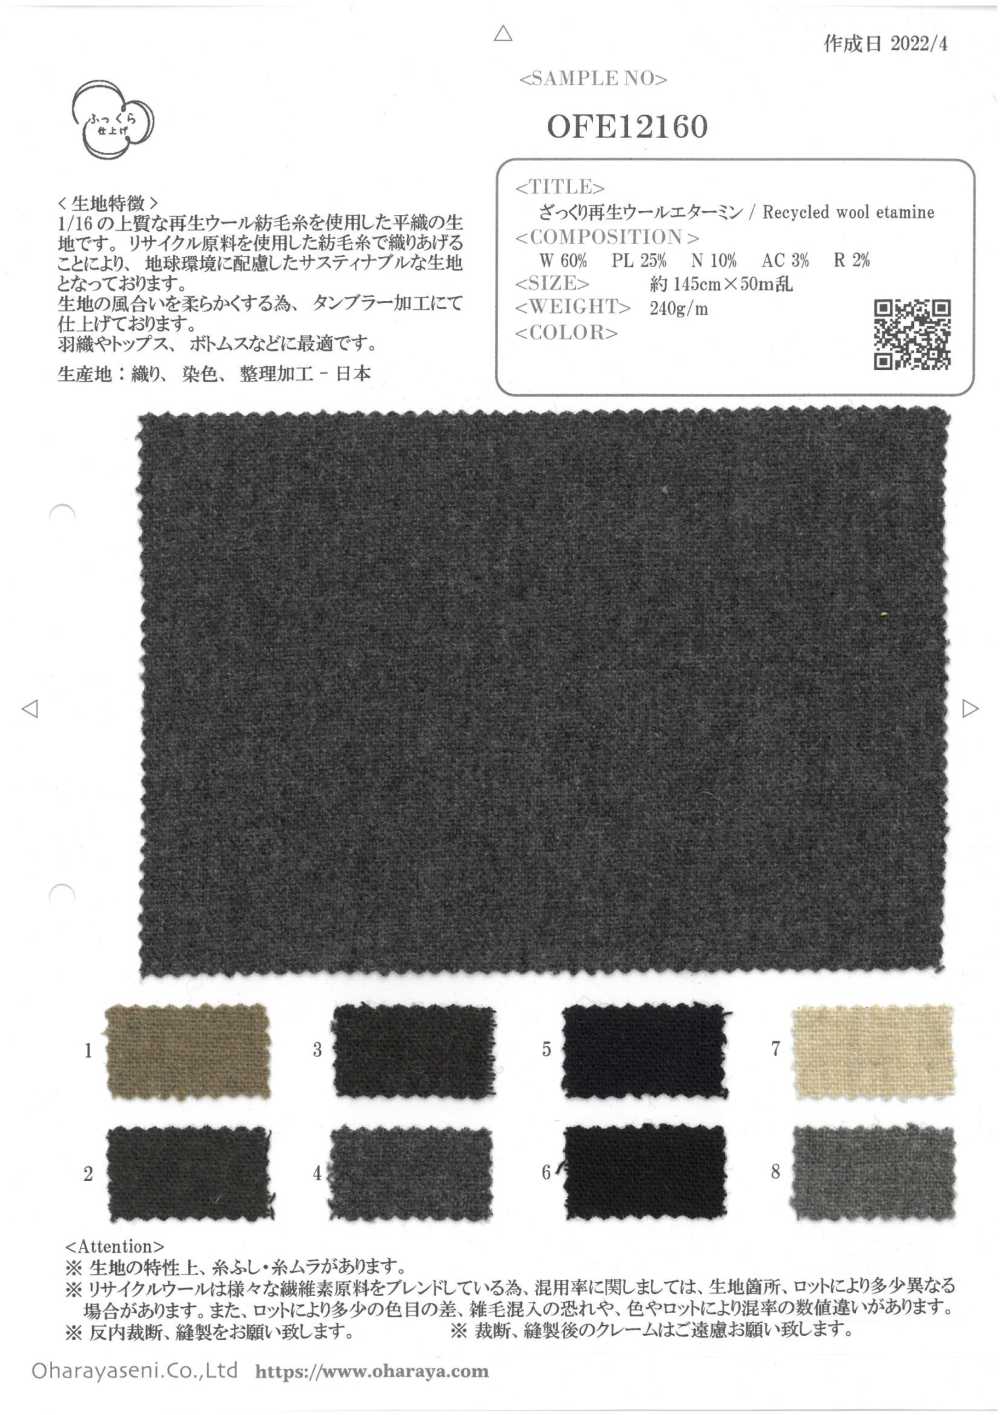 OFE12160 Roughly Recycled Wool Etamine[Textile / Fabric